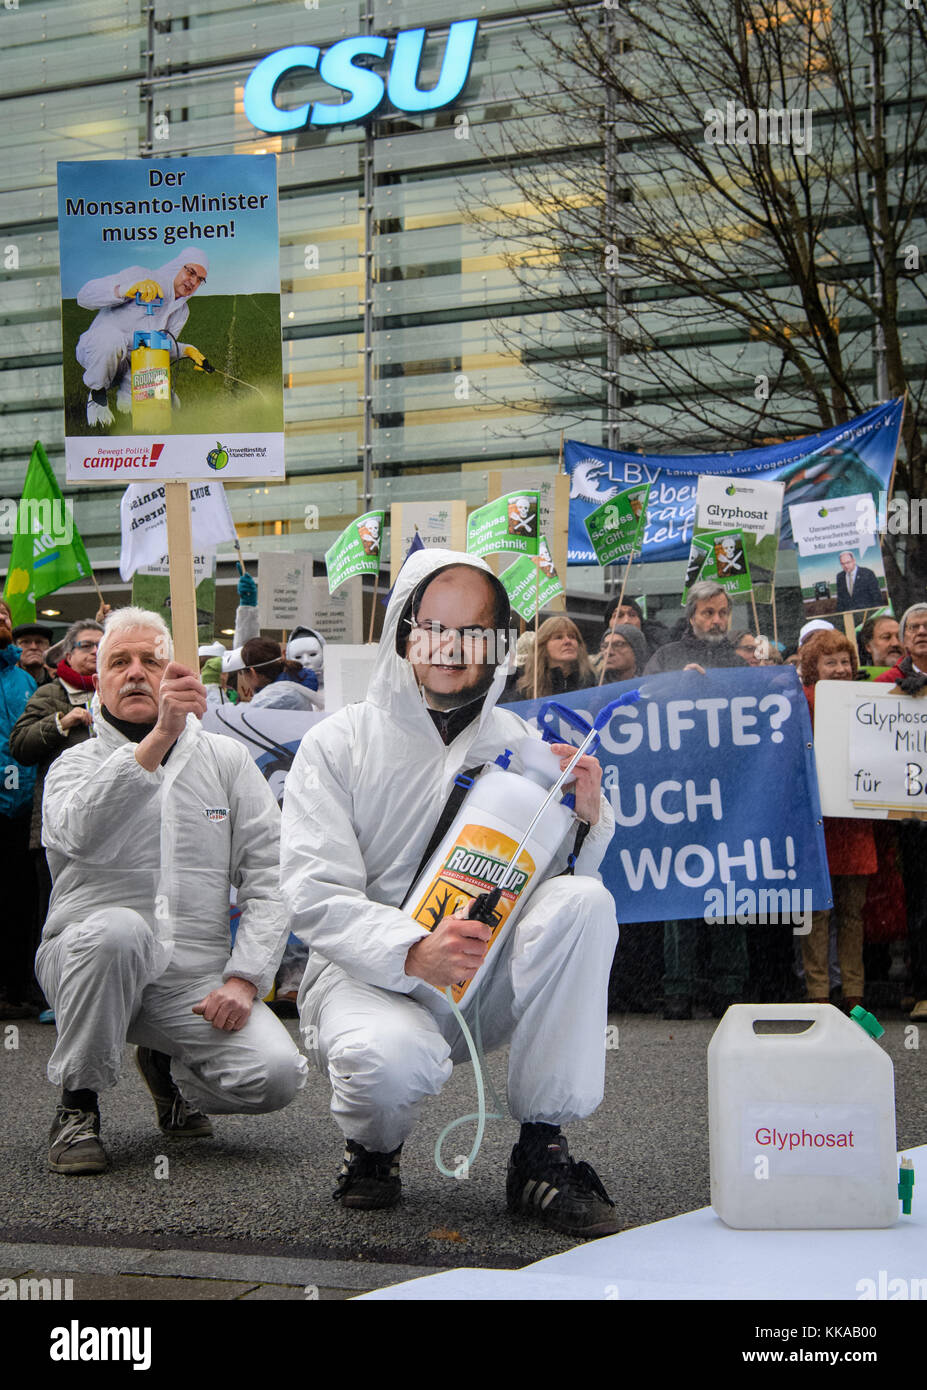 An activist wearing a mask of Minister of Agriculture Schmidt (CSU) sprays with water during a demonstration organised by differend environmental organisations against glyphosat in front of the CSU party headquarters in Munich, Germany, 29 November 2017. The demonstration by Bund Naturschutz in Bayern ('Association Natural Protection in Bavaria'), Compact and the Environmental Institute Munich with the motto 'Glyphosat-Skandal muss Konsequenzen haben' (lit. 'Glyphosat-Scandal must have consequences') aims at the vote by Minister of Agriculture Schmidt (CSU) on the readmission of Glyphosat. Pho Stock Photo